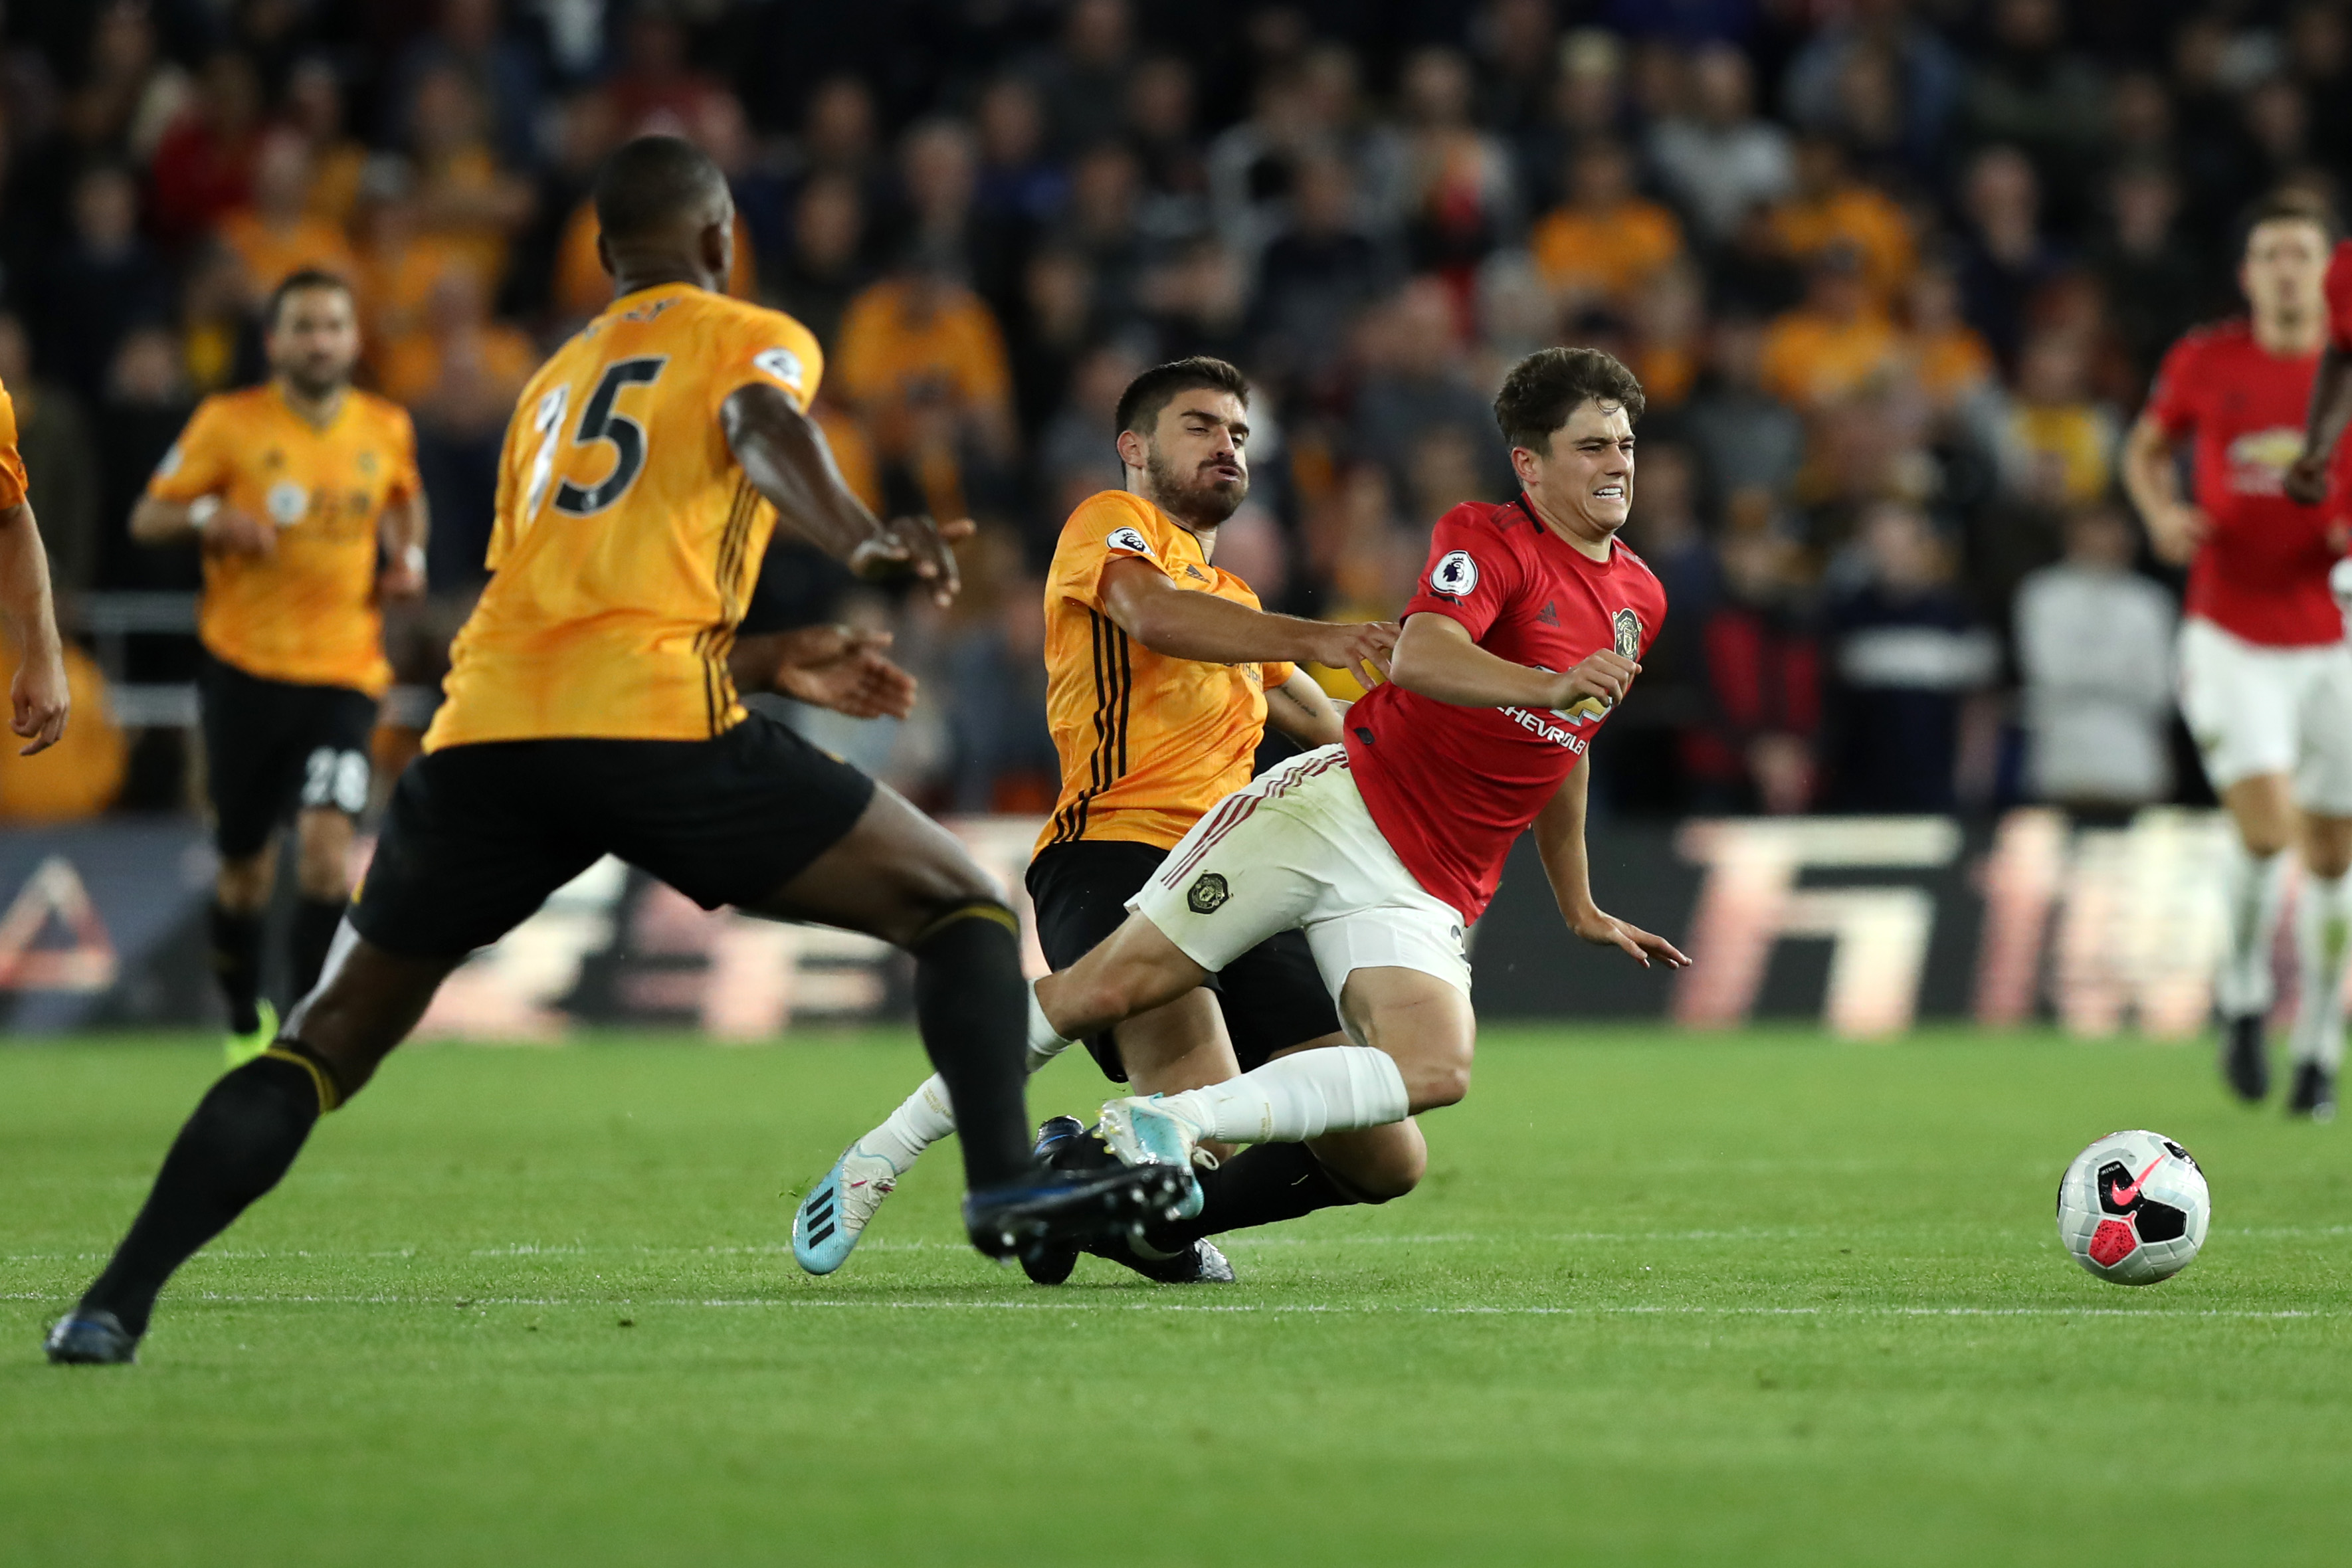 WOLVERHAMPTON, ENGLAND - AUGUST 19: Daniel James of Manchester United is tackled by Ruben Neves of Wolverhampton Wanderers during the Premier League match between Wolverhampton Wanderers and Manchester United at Molineux on August 19, 2019 in Wolverhampton, United Kingdom. (Photo by David Rogers/Getty Images)